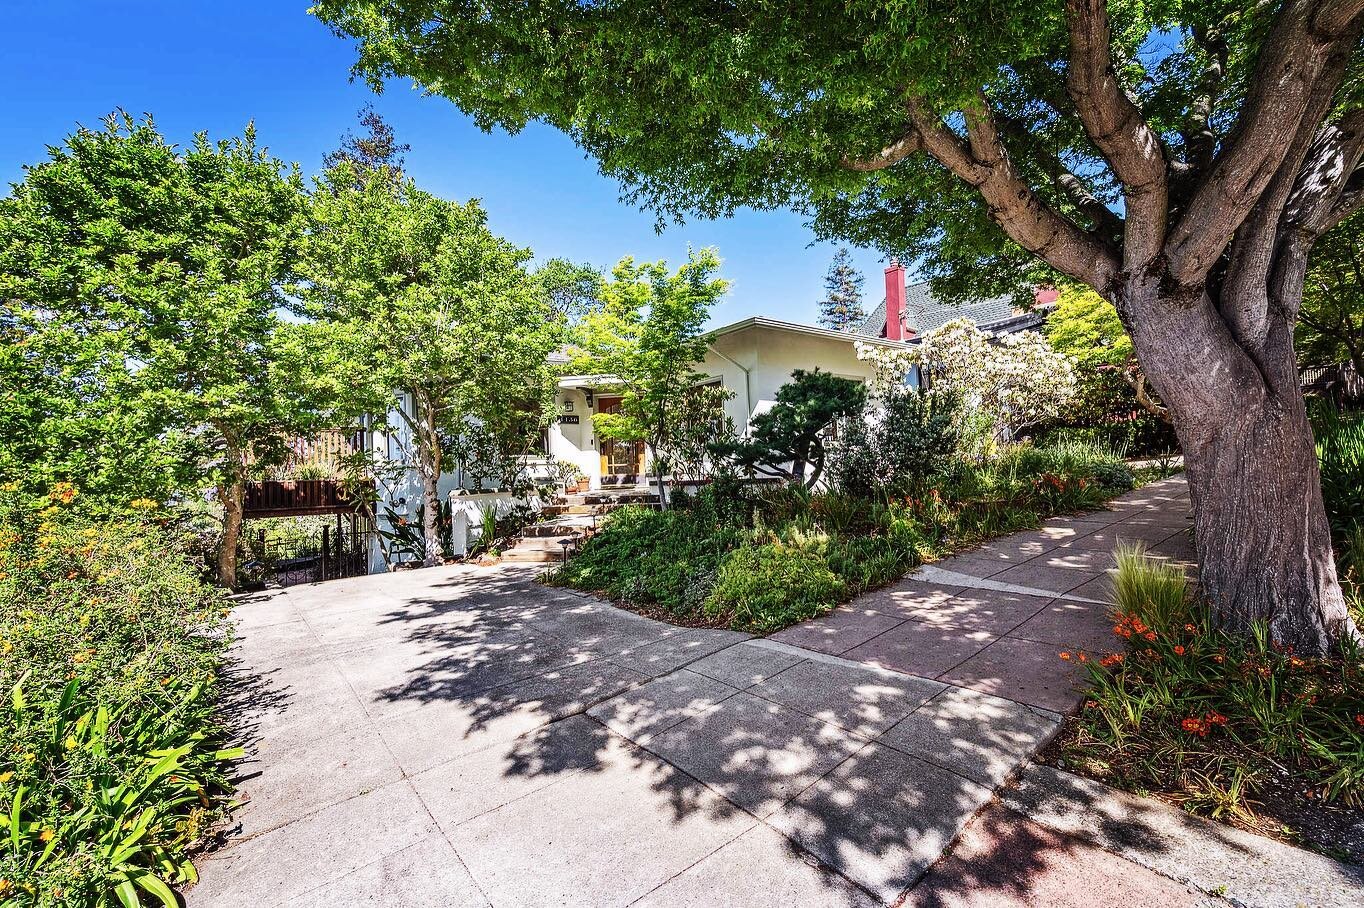 Such a pretty, leafy hello in this botanical bungalow with additional guest suite &mdash; now on the market and getting all the love.
Open houses Saturday and Sunday. Do not miss it!

www.1156walnut.com

&hellip;

1156 Walnut Street, Berkeley 
3++ be